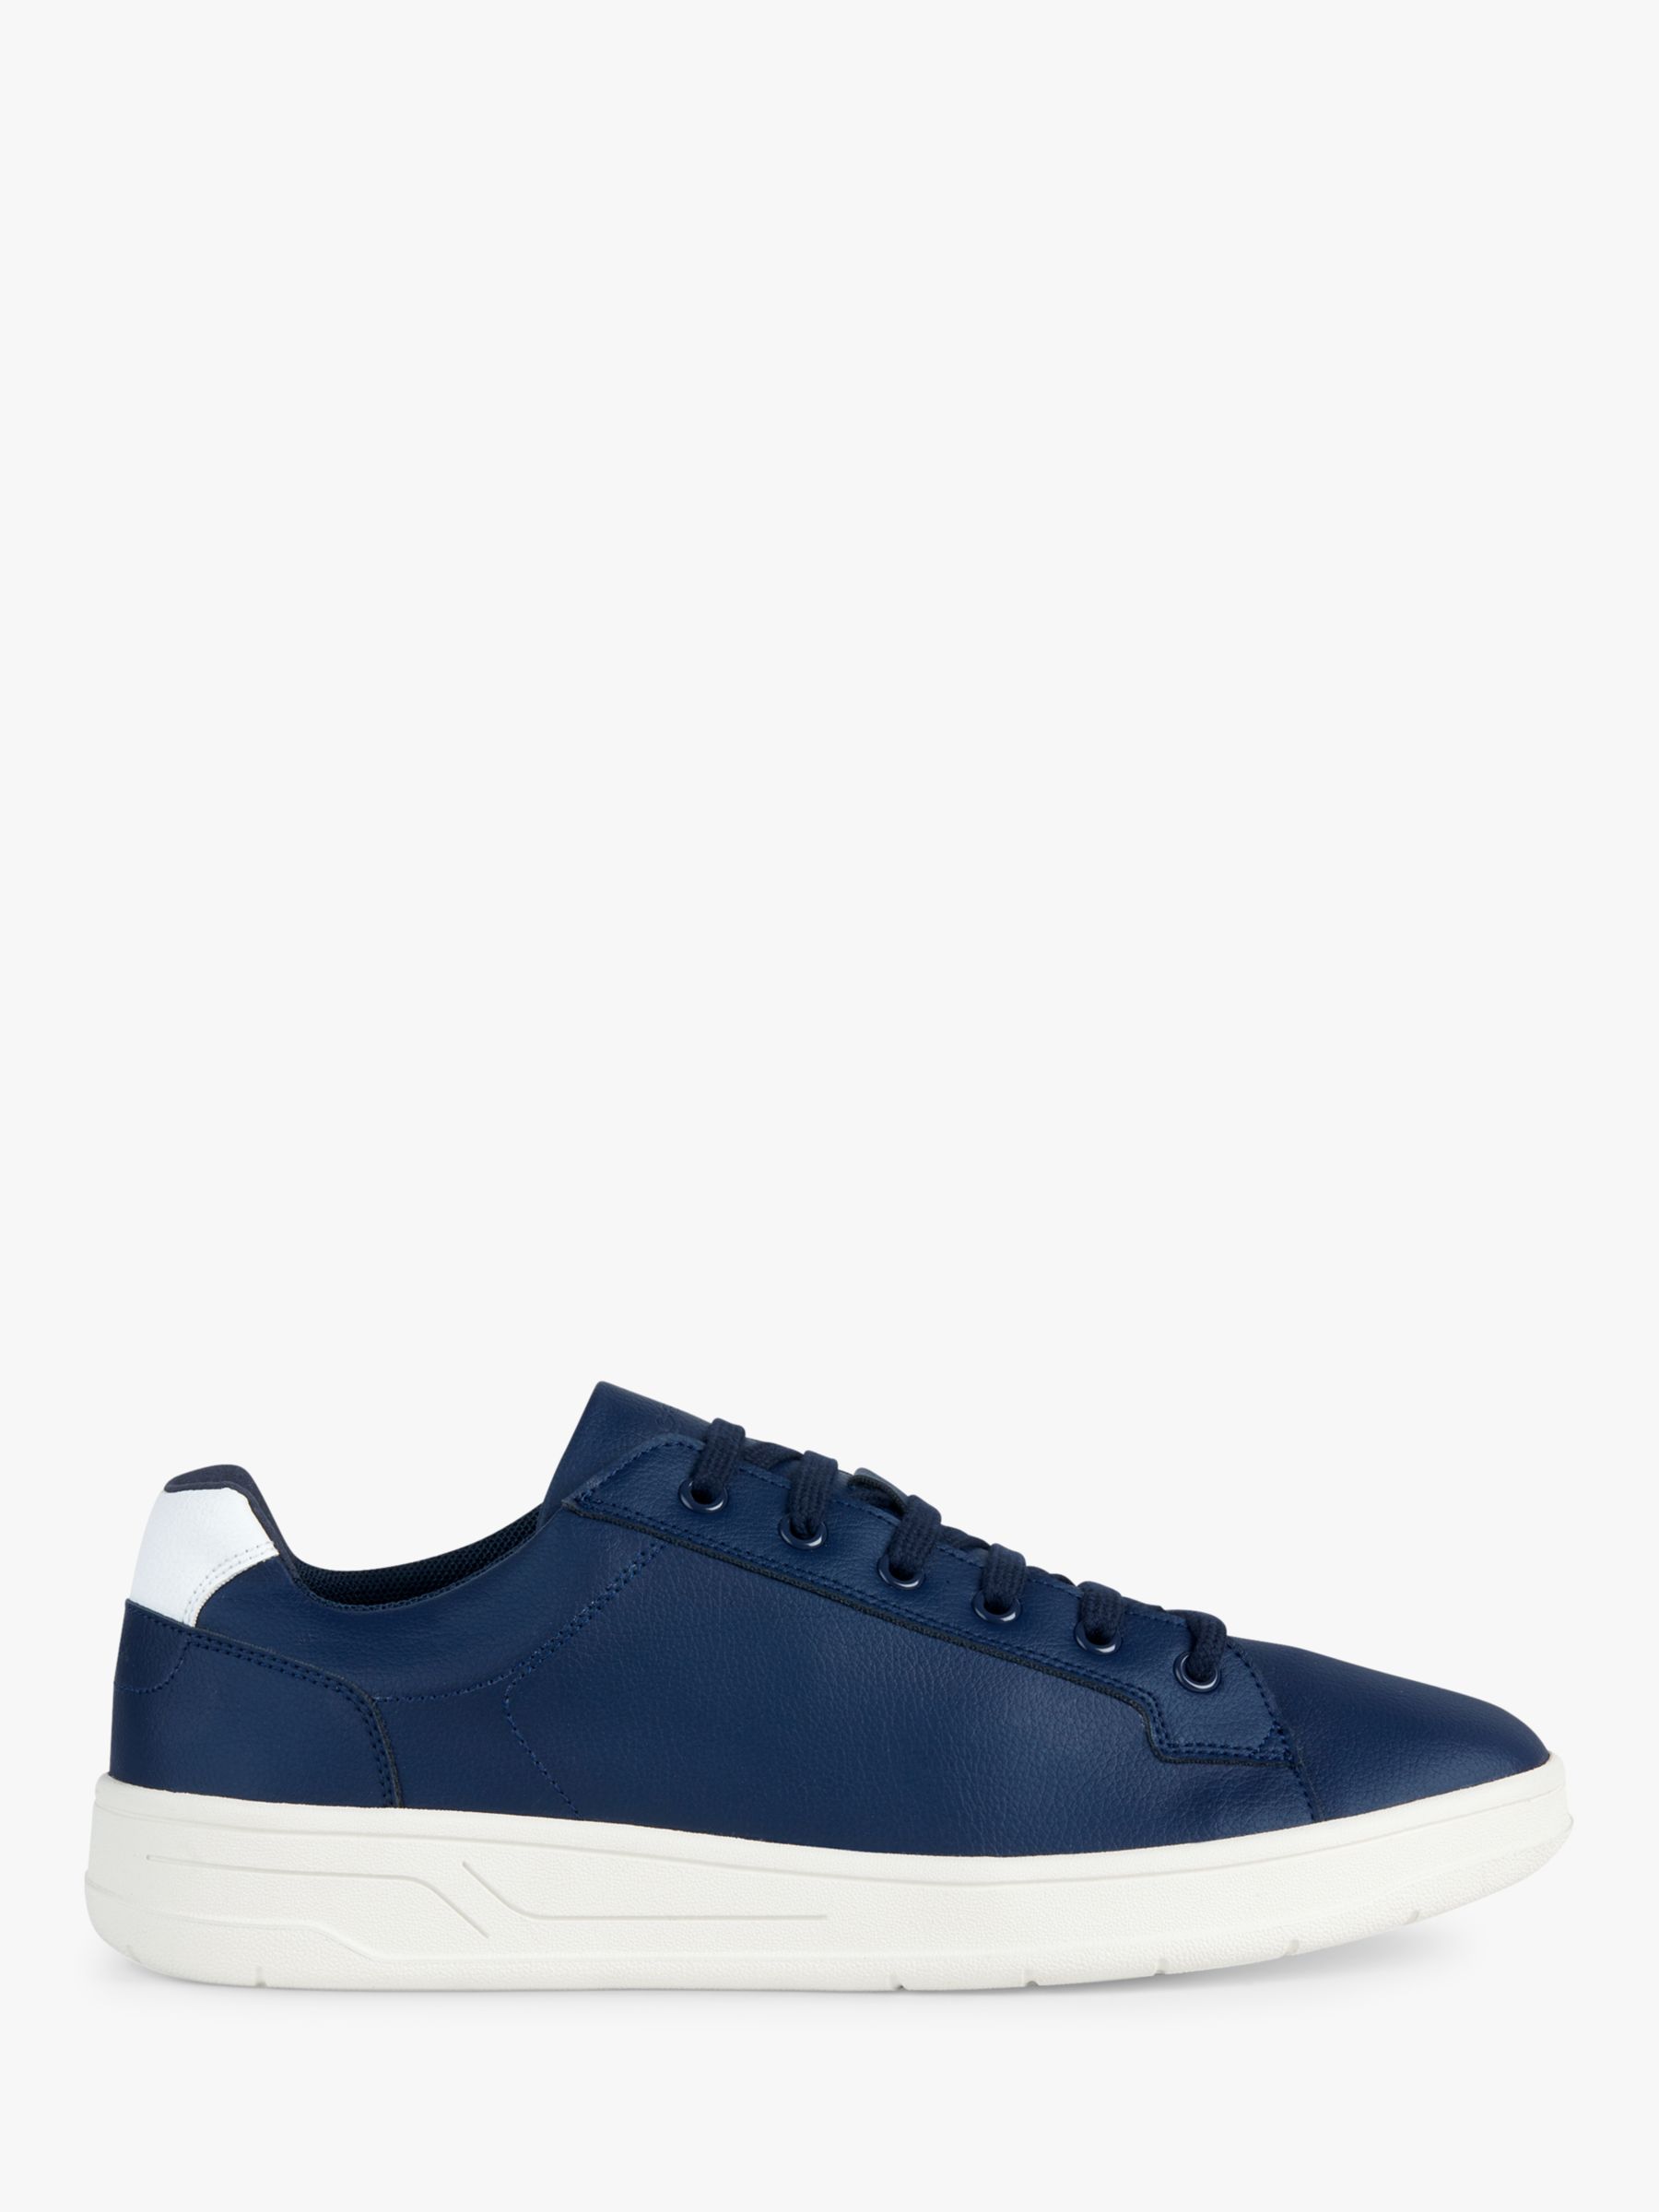 Geox Magnete Low Top Leather Trainers, Navy